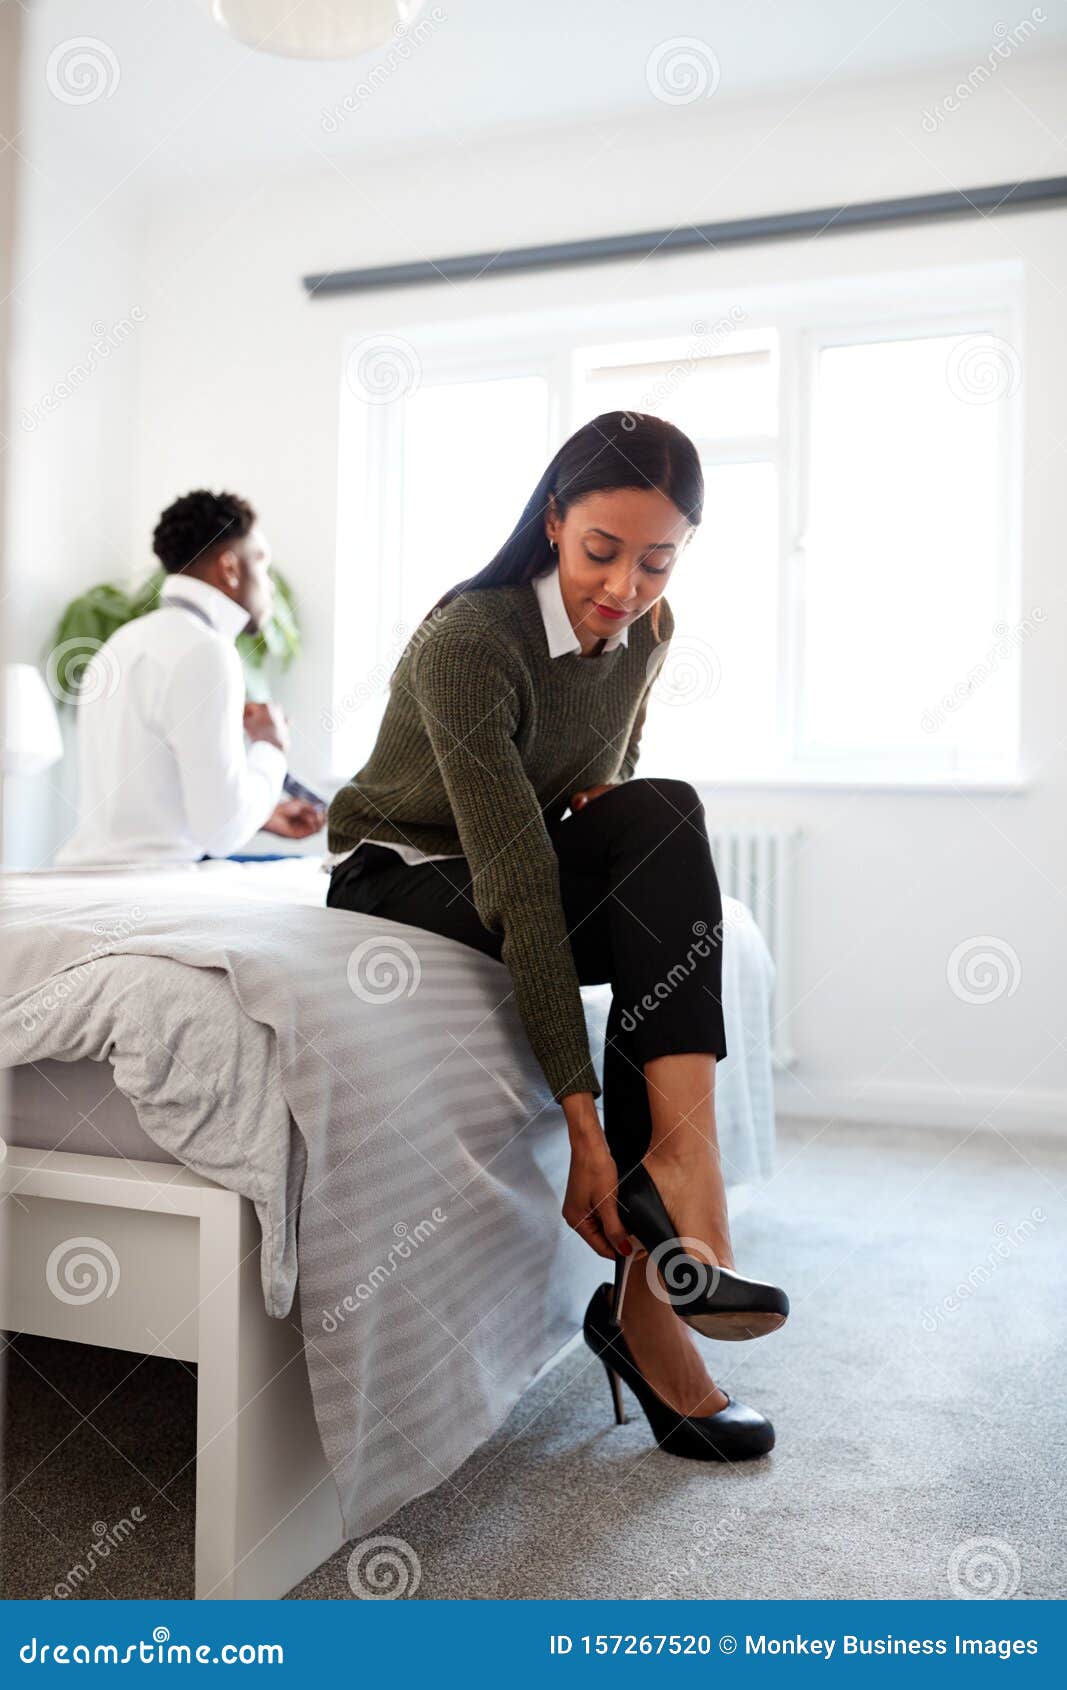 Business Couple In Bedroom Getting Ready For Work